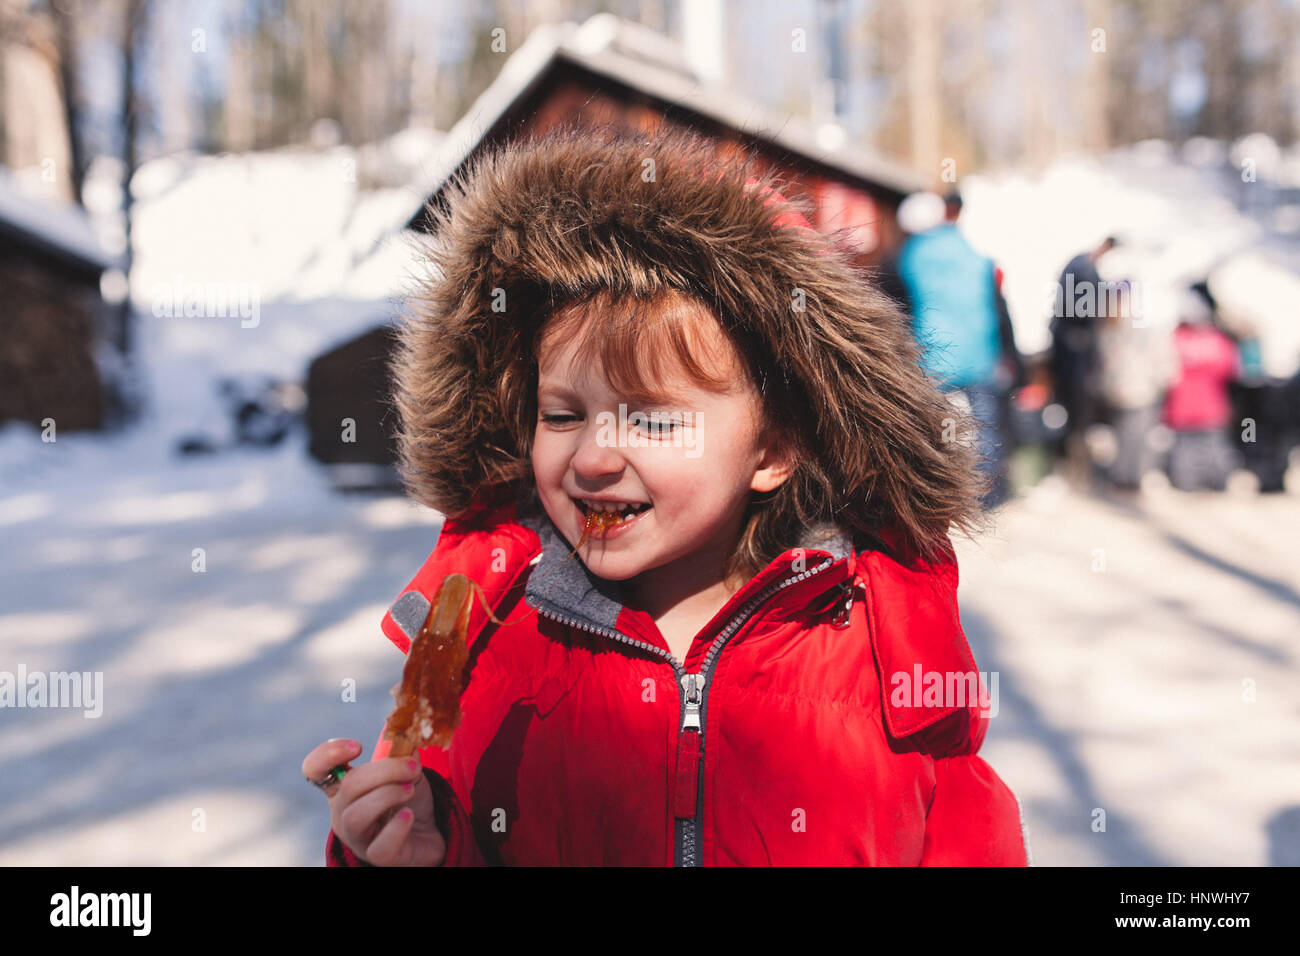 Girl in fur hood eating sticky lolly Stock Photo